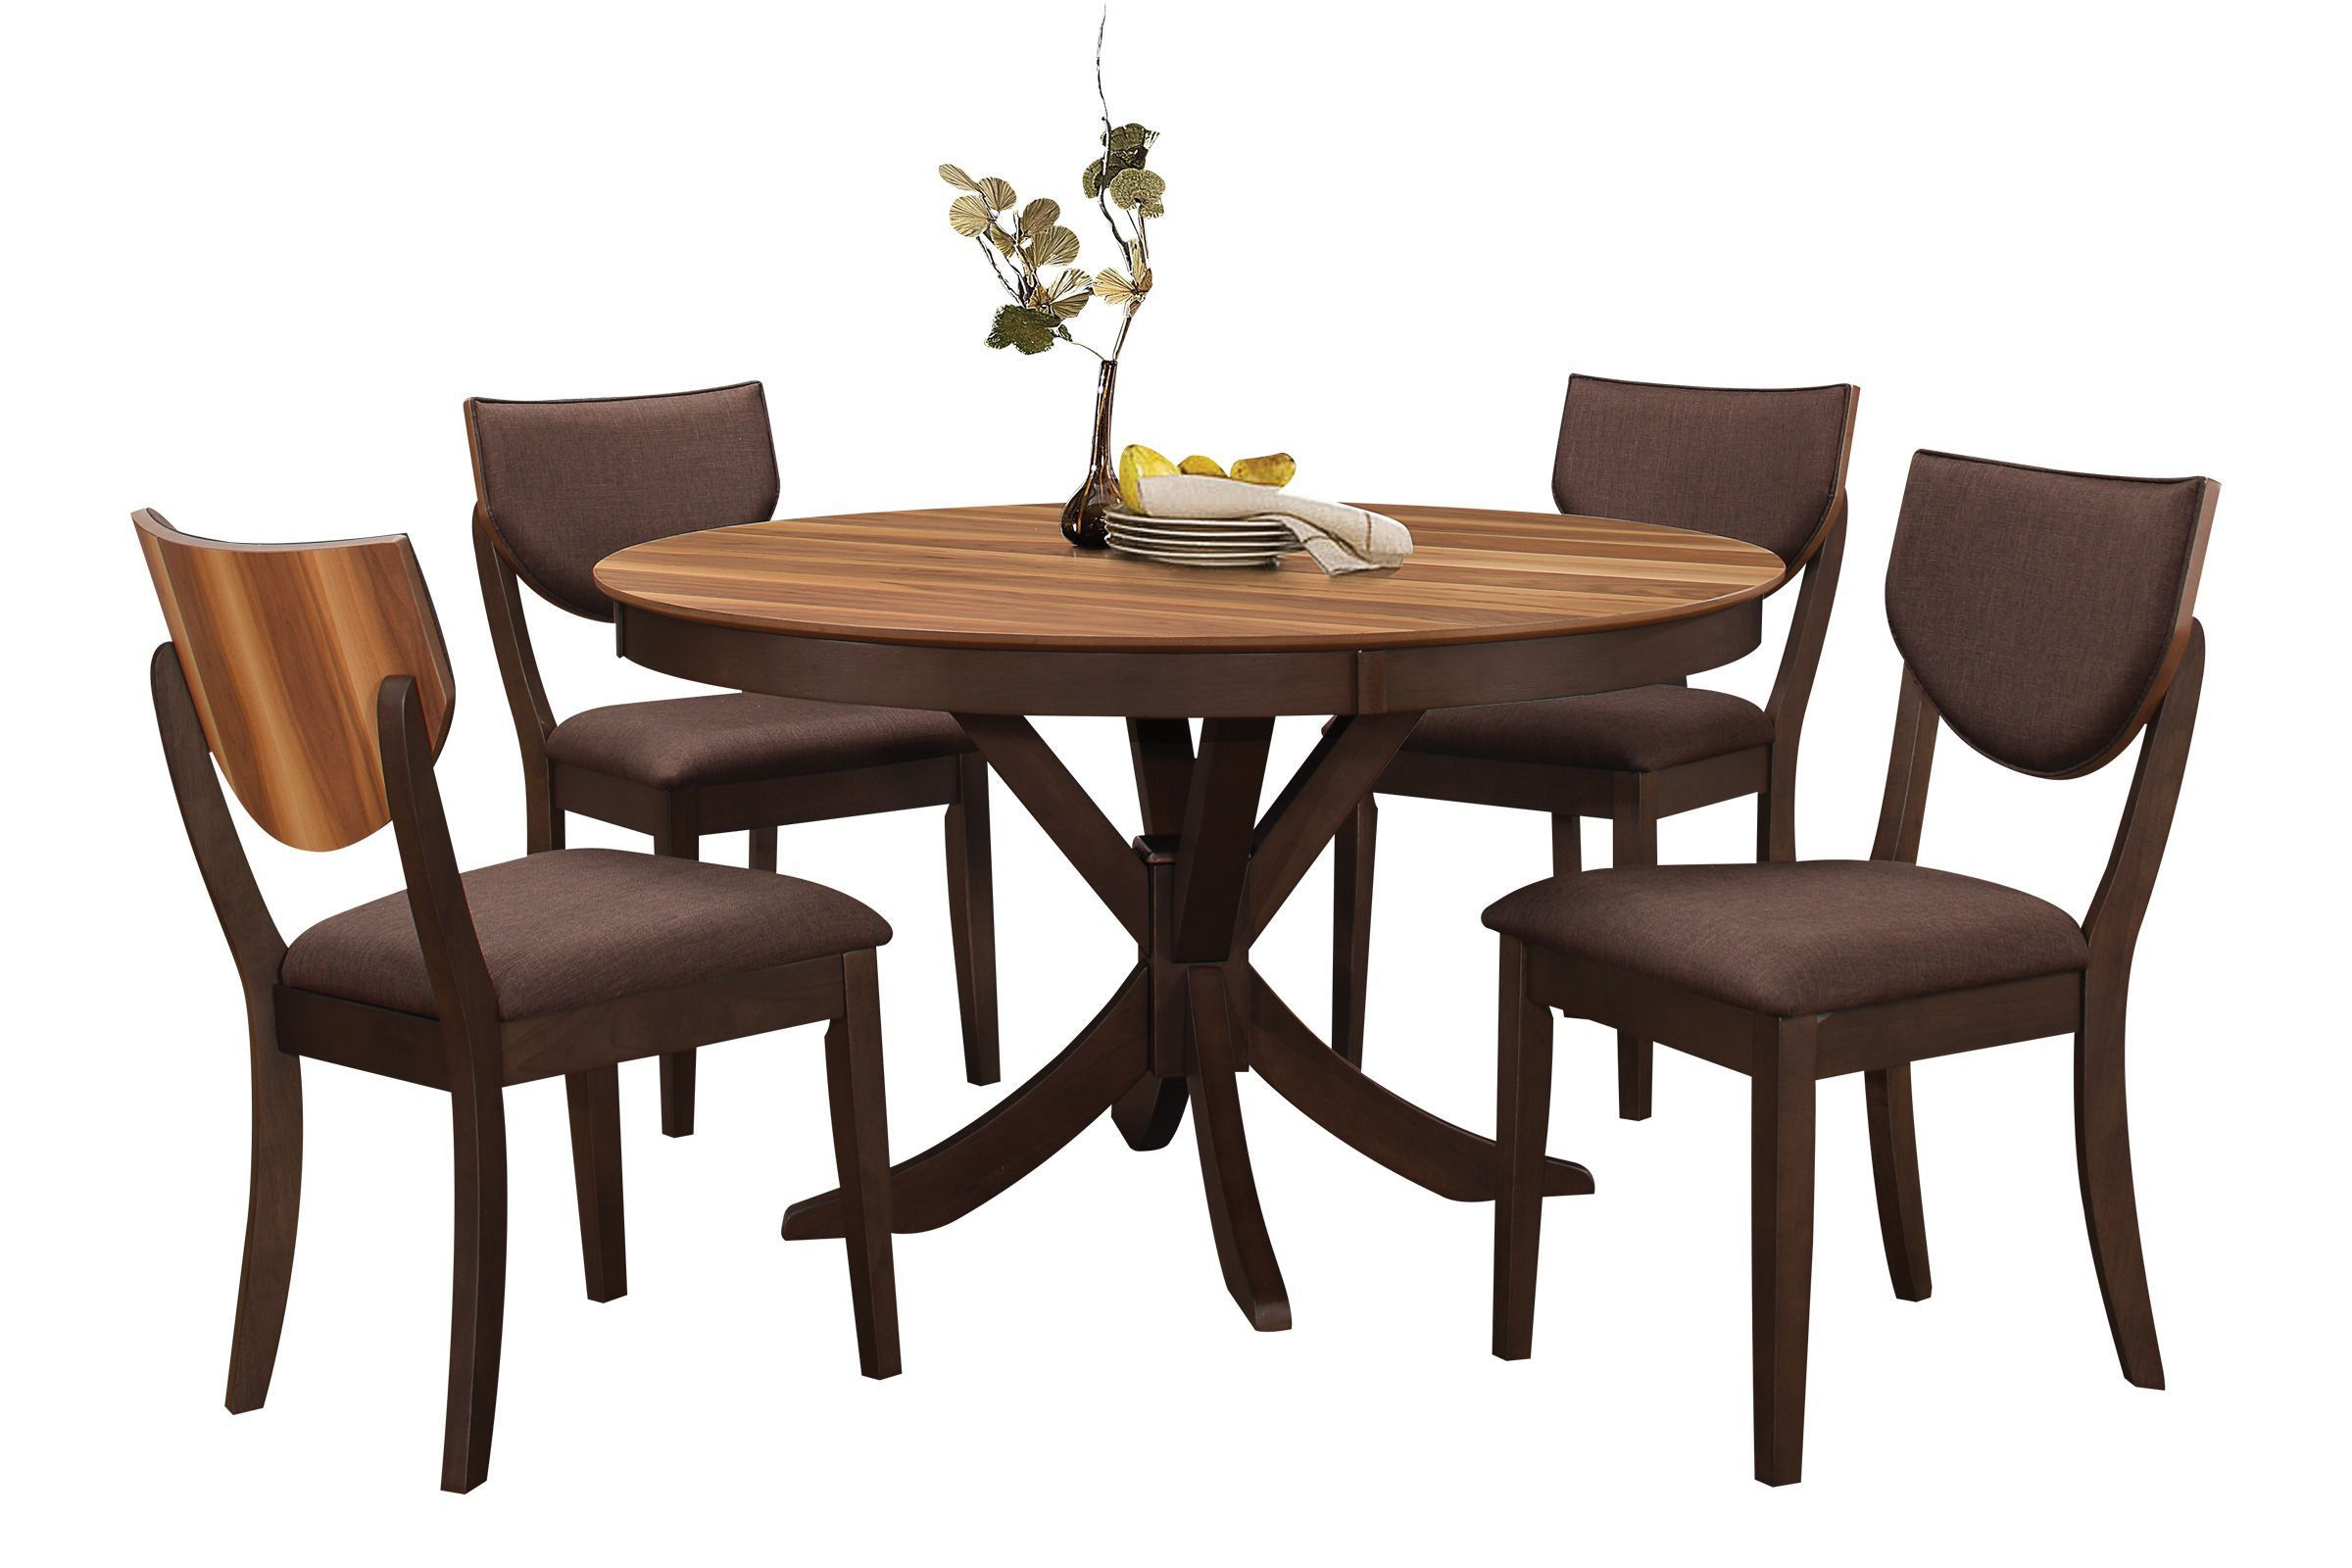 Turner Round Dining Table 4 Side Chairs Round Dining regarding size 2400 X 1600